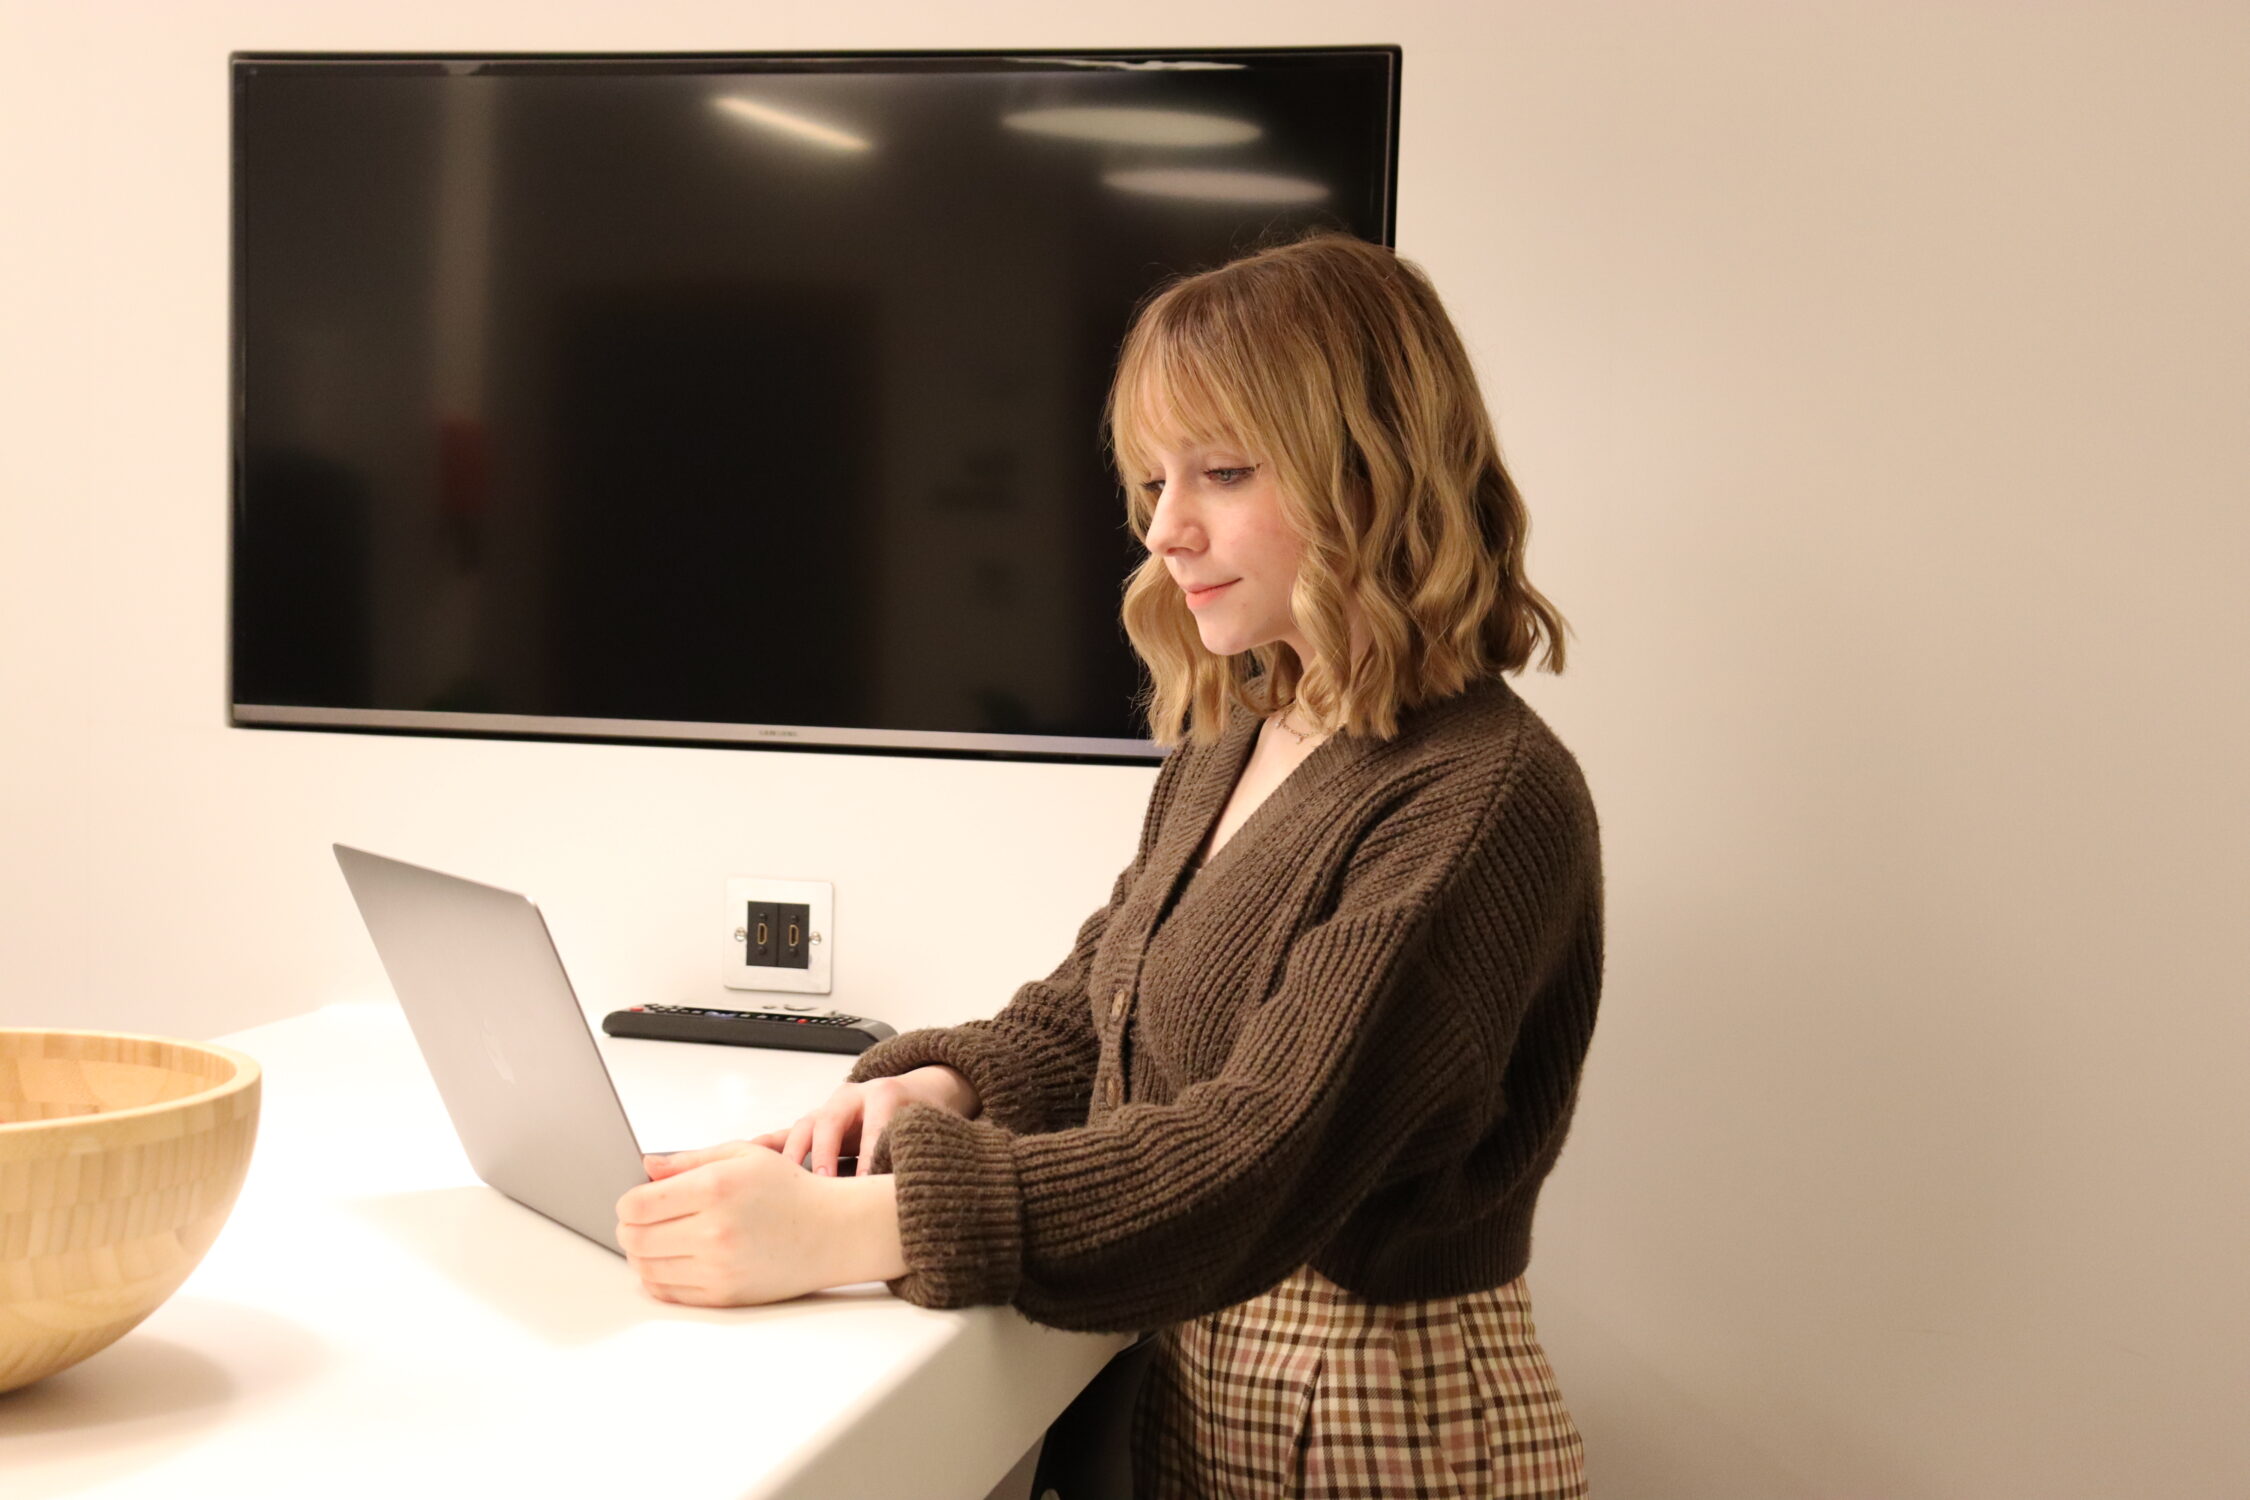 Digital Support Apprentice, Ruby. Ruby is pictured at a standing desk, working on a laptop, wearing a brown cardigan and checked trousers.